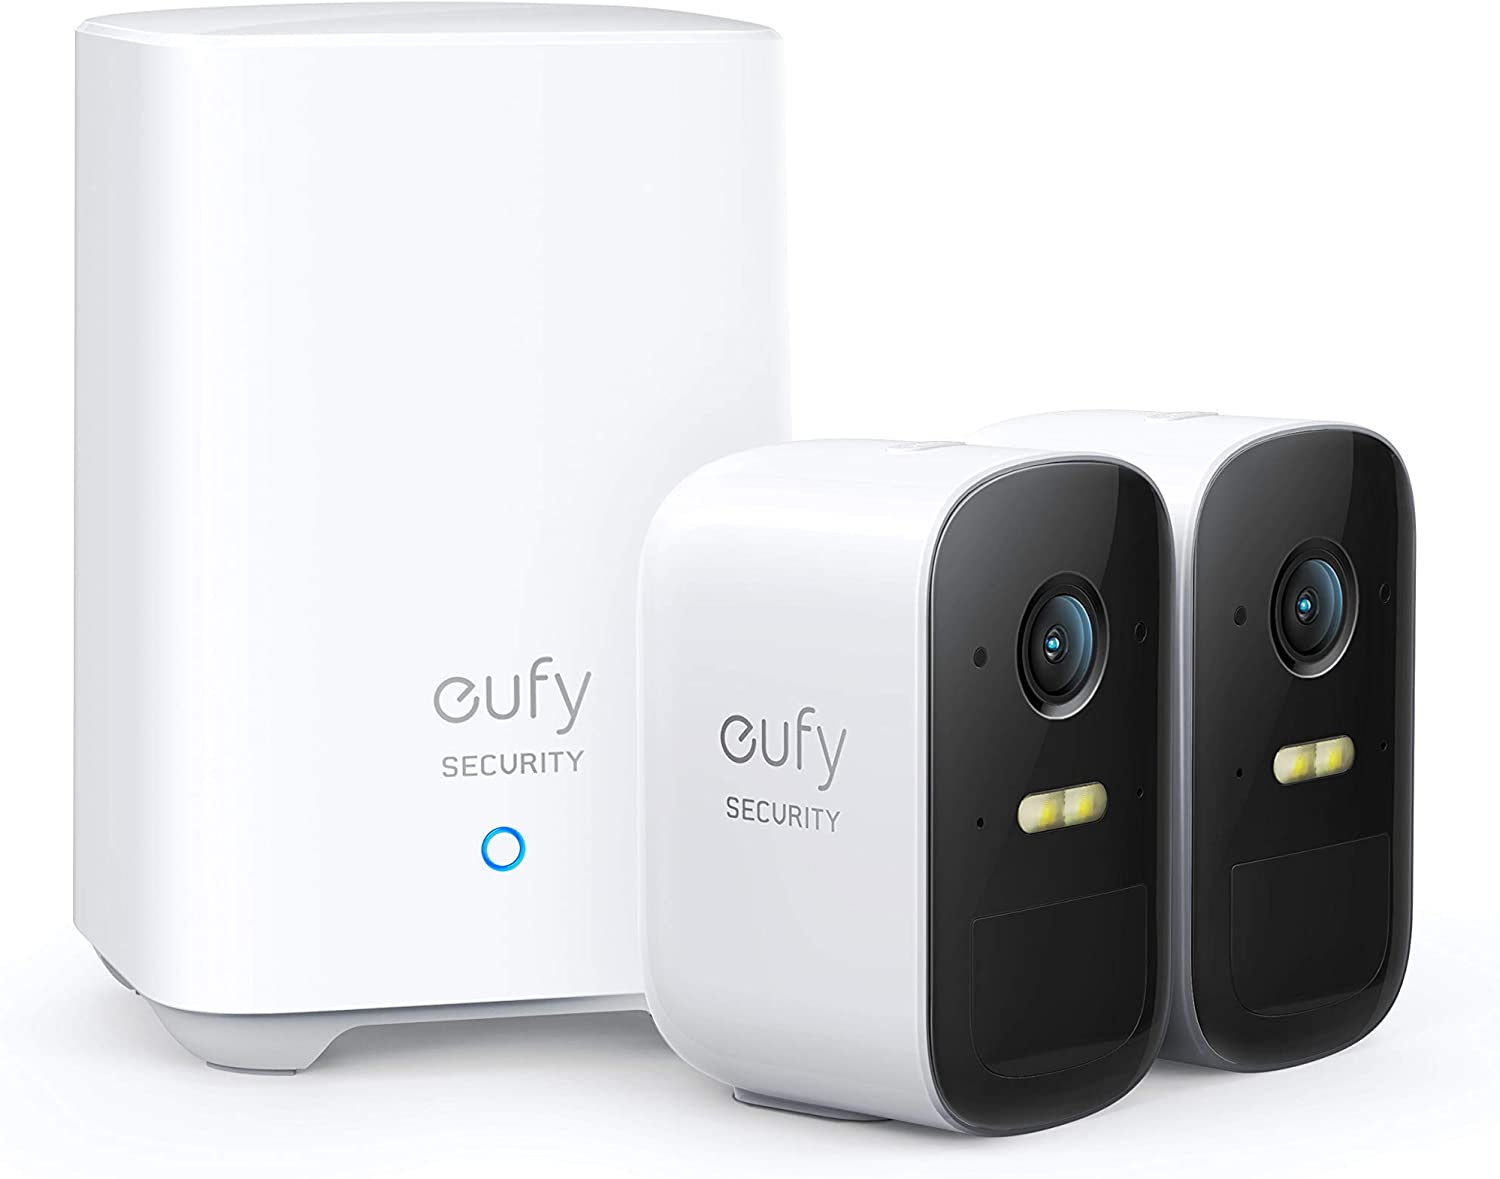 Review of eufy Outdoor Security Camera, Wireless Home Security System